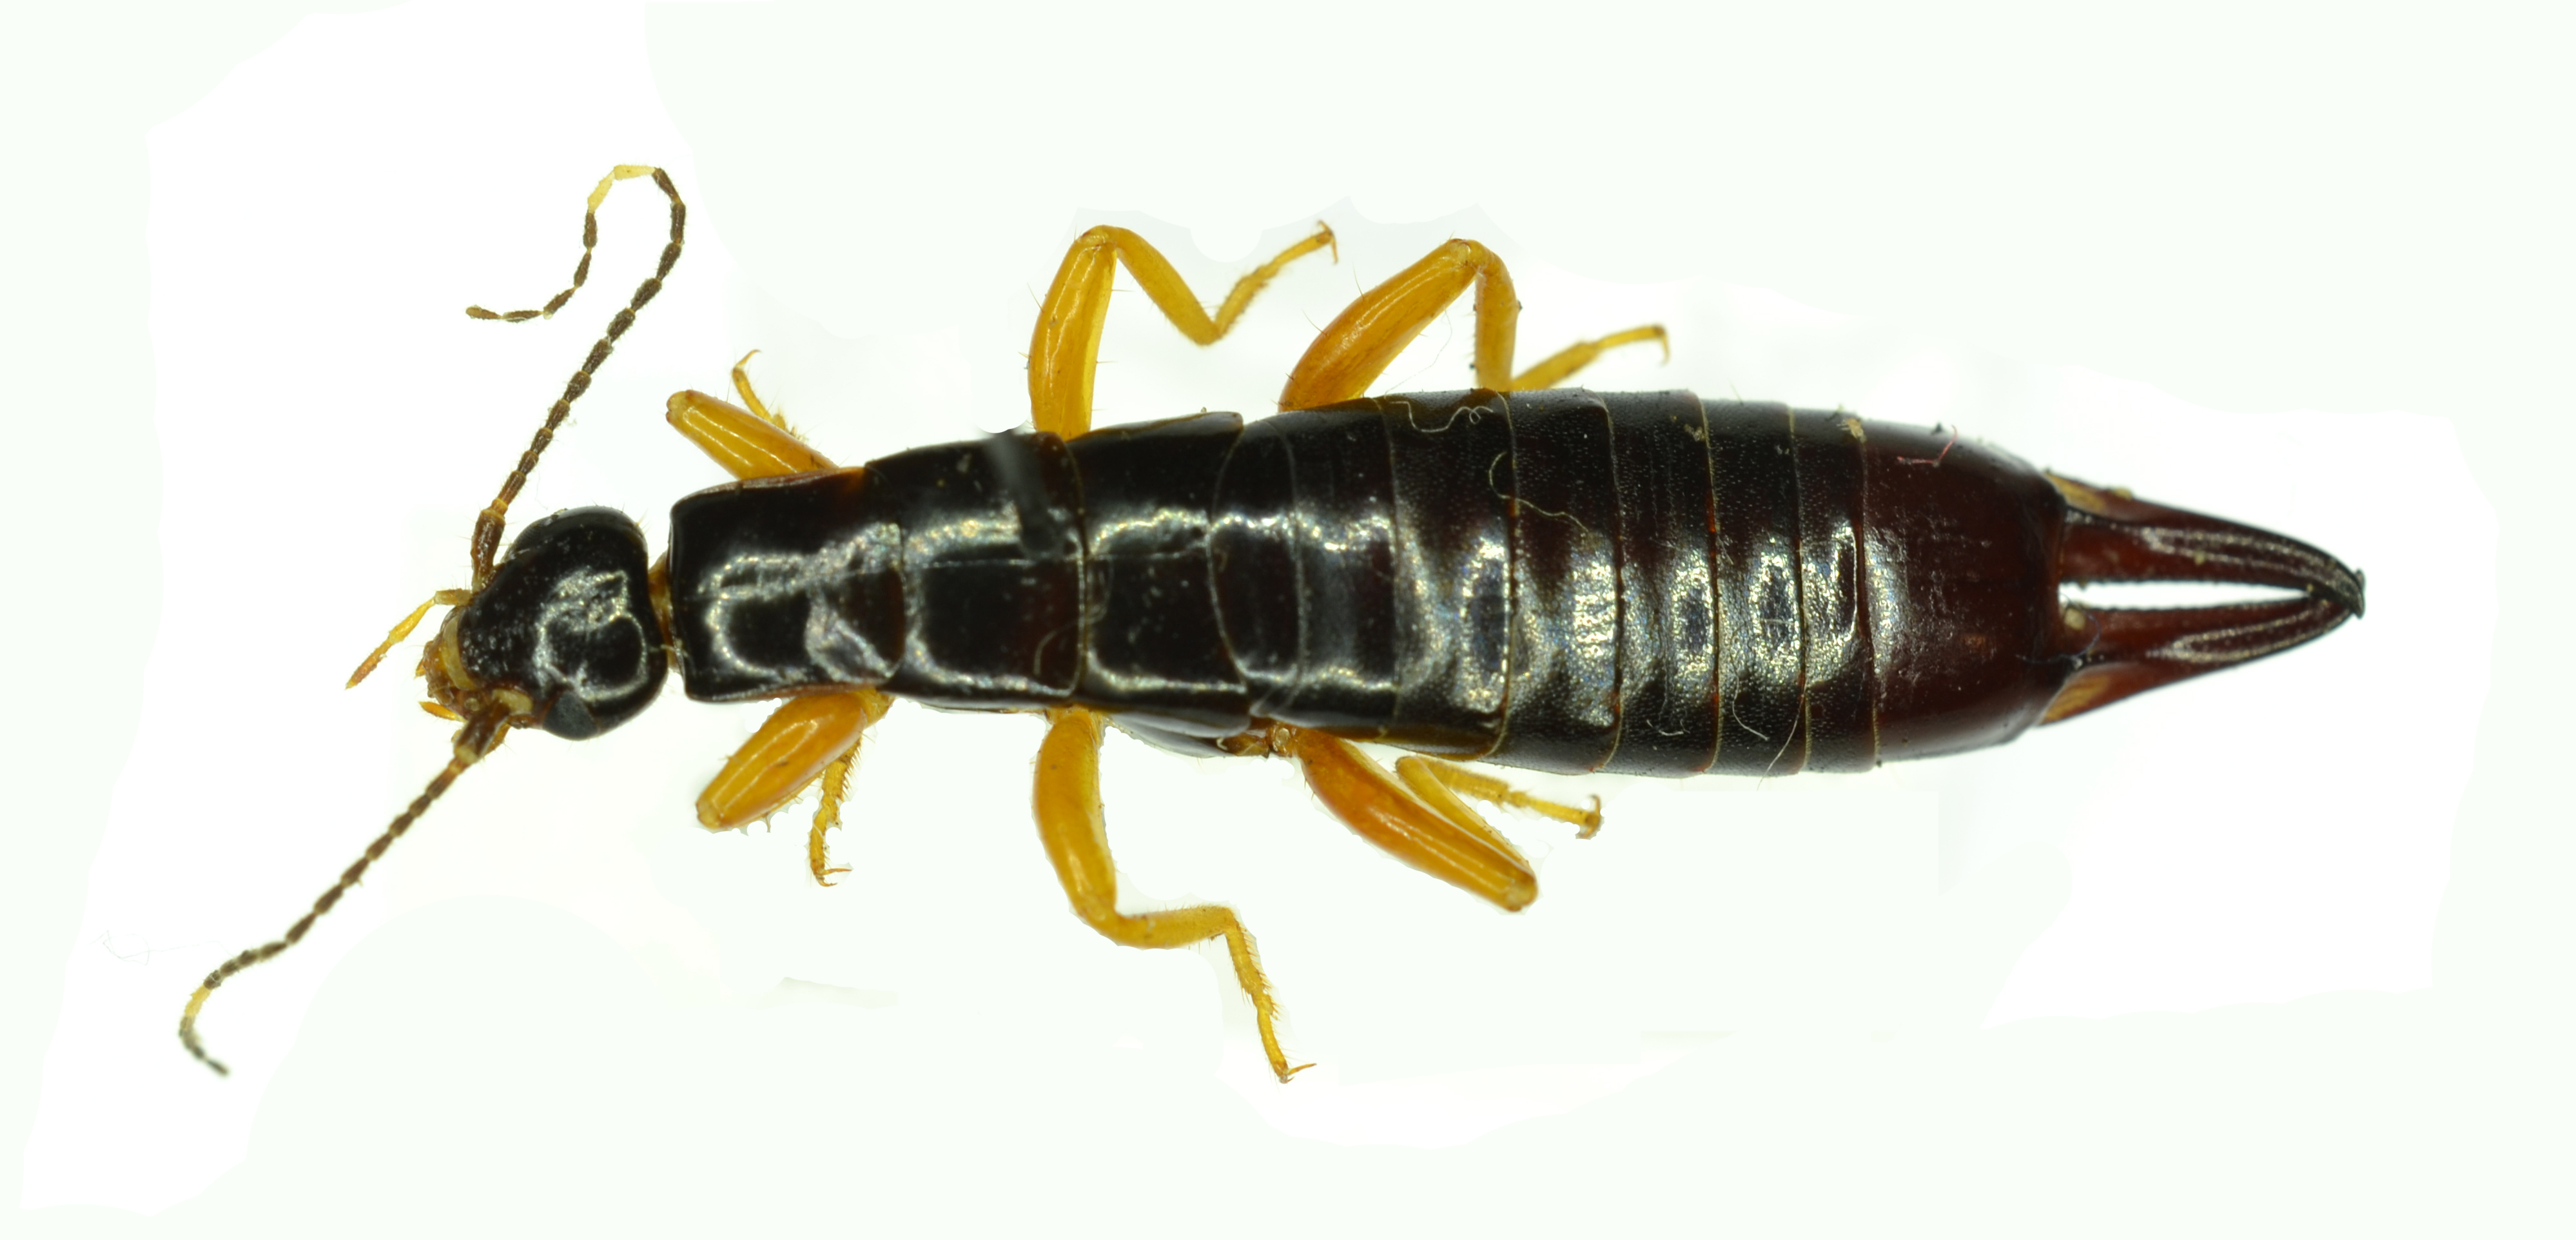 Earwigs (Order Dermaptera) Earwigs are brown in color, and their whole body is about 2 inches long. With large pinchers on the end of their tail. They are most visible inside and outside of the home during the months or a season where there is higher than normal moisture (or rain) and hotter temperatures. They will typically hide in small gaps or crevices such as door or window frames, gutters, and water damaged wood.